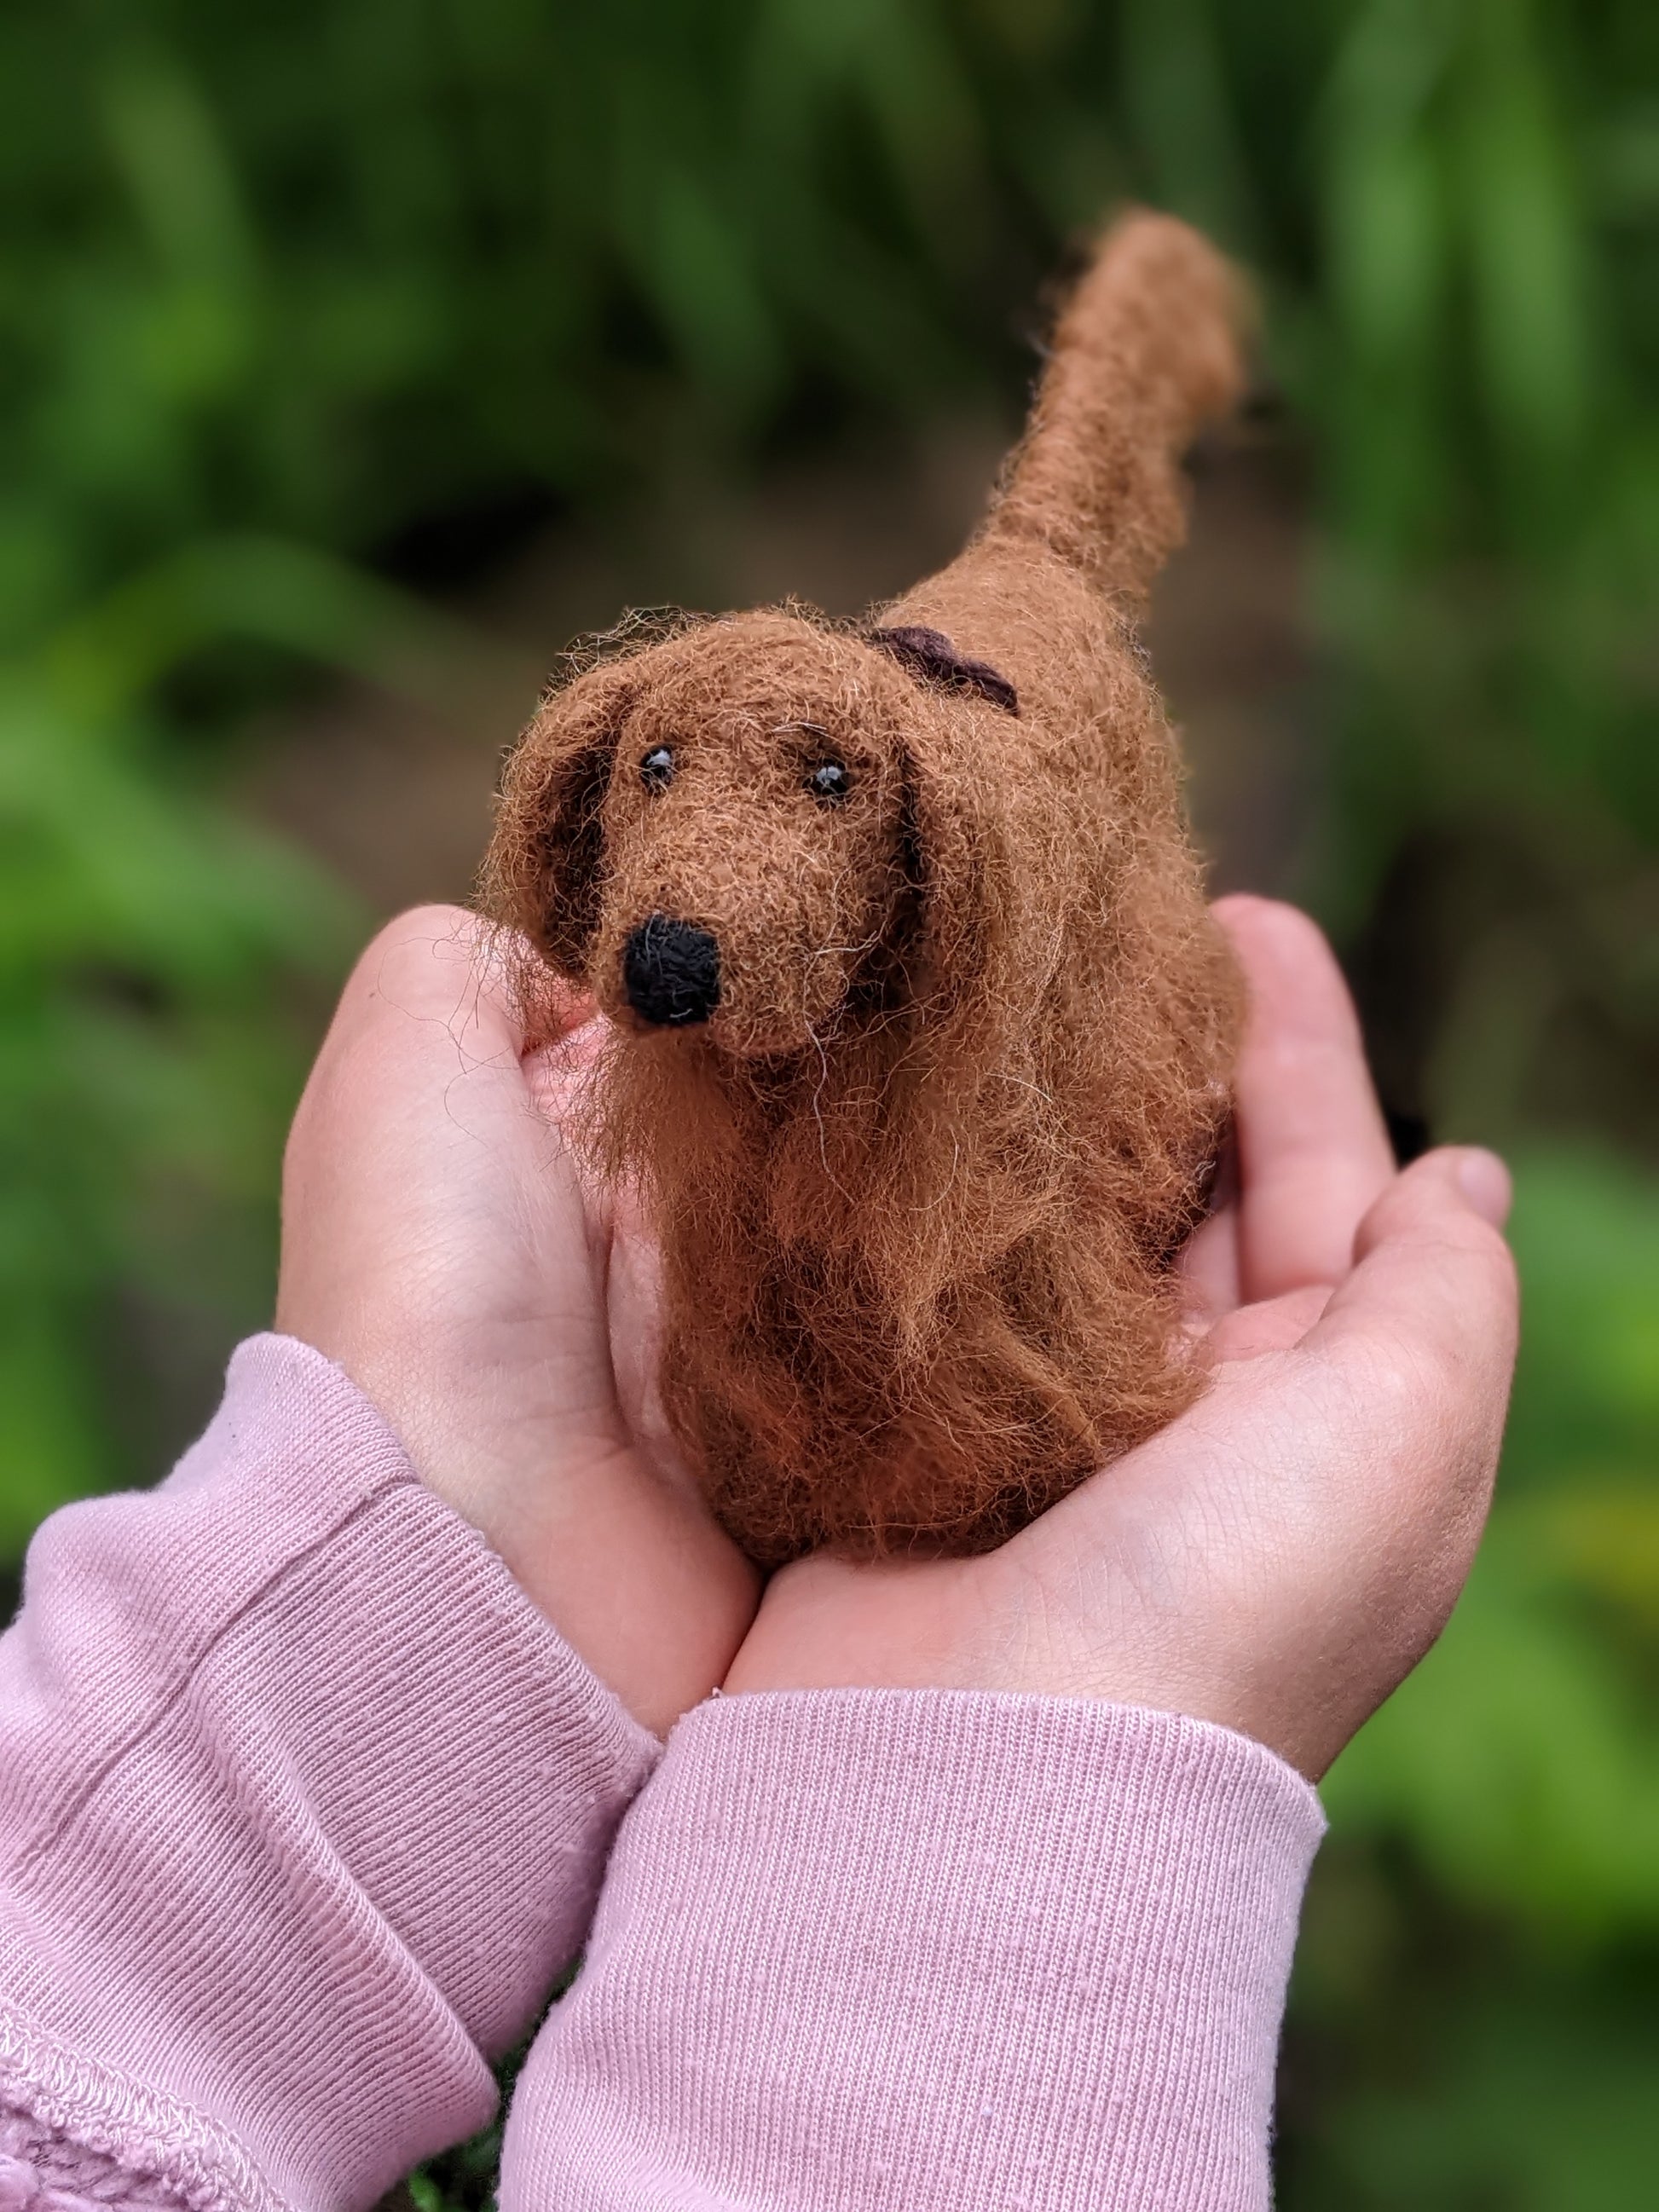 Irish setter dog needle felted wool sculpture  held in child's hands